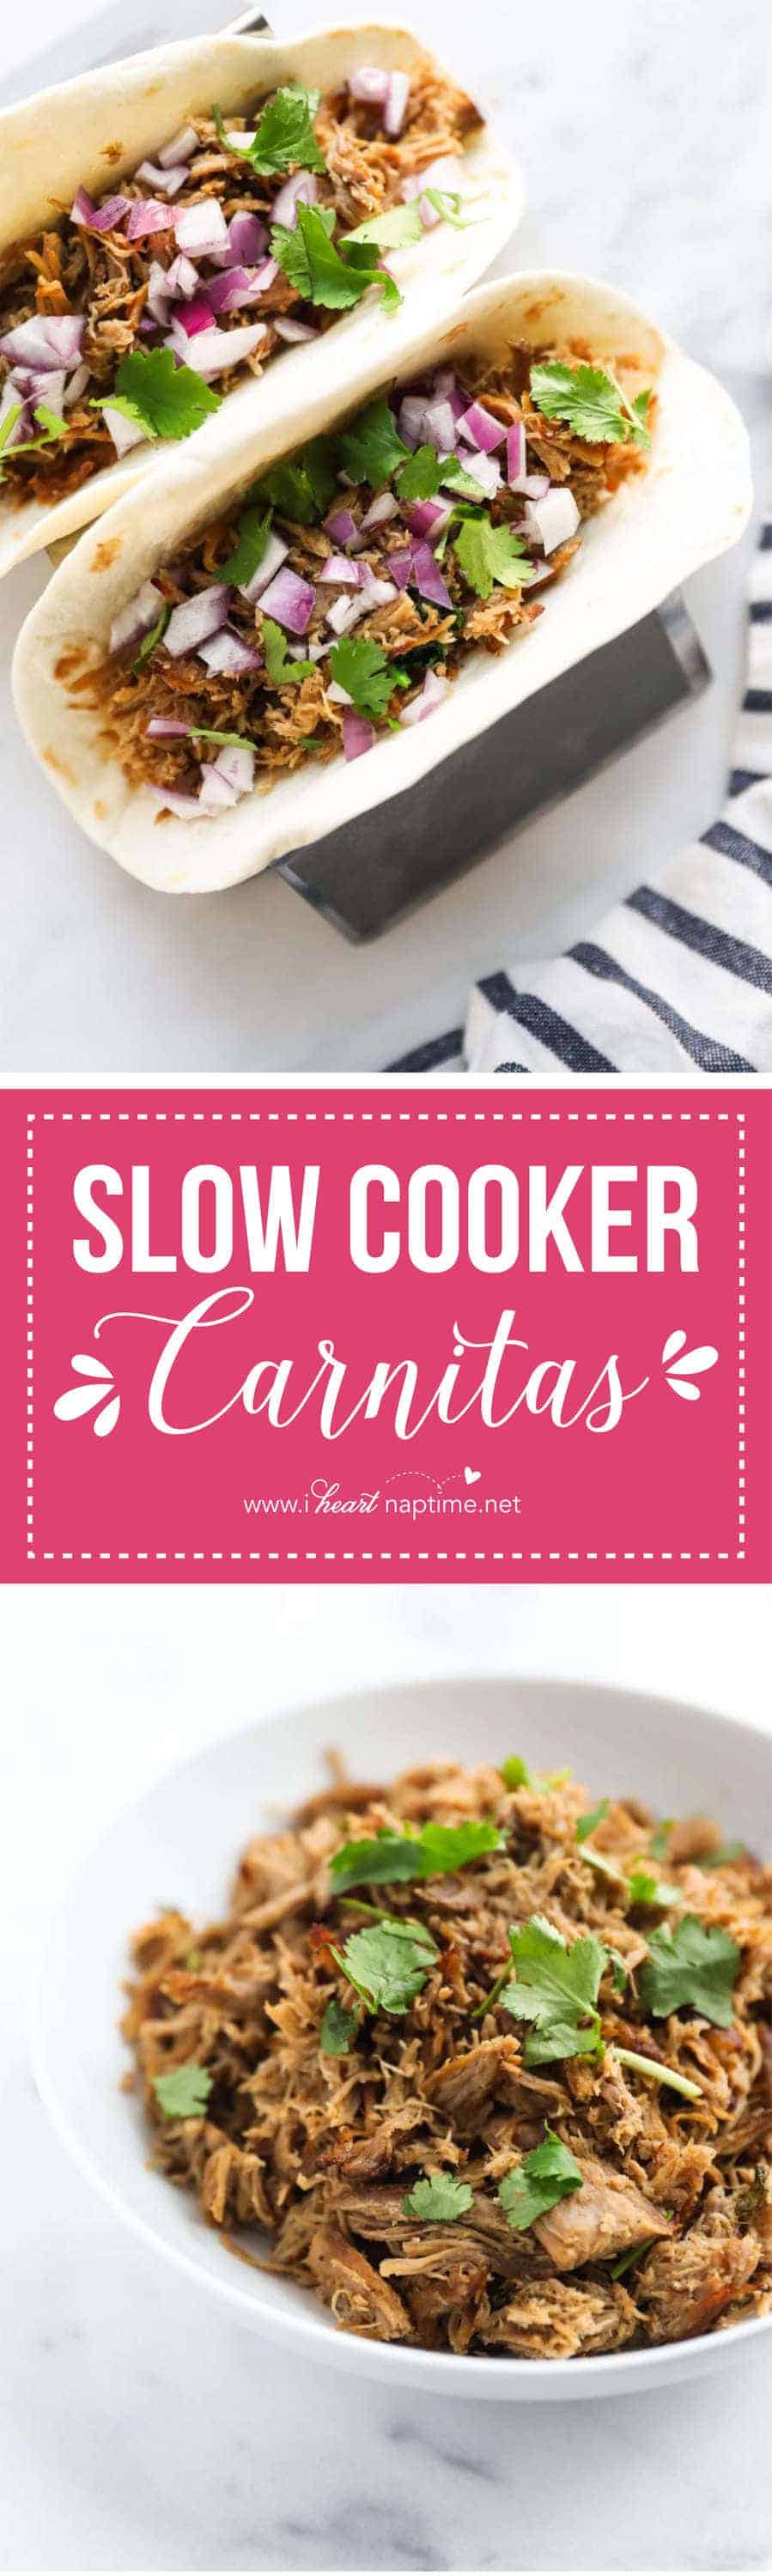 These Slow Cooker Carnitas are super easy to make and taste great in tacos, nachos, enchiladas or burritos! So tender and full of flavor!